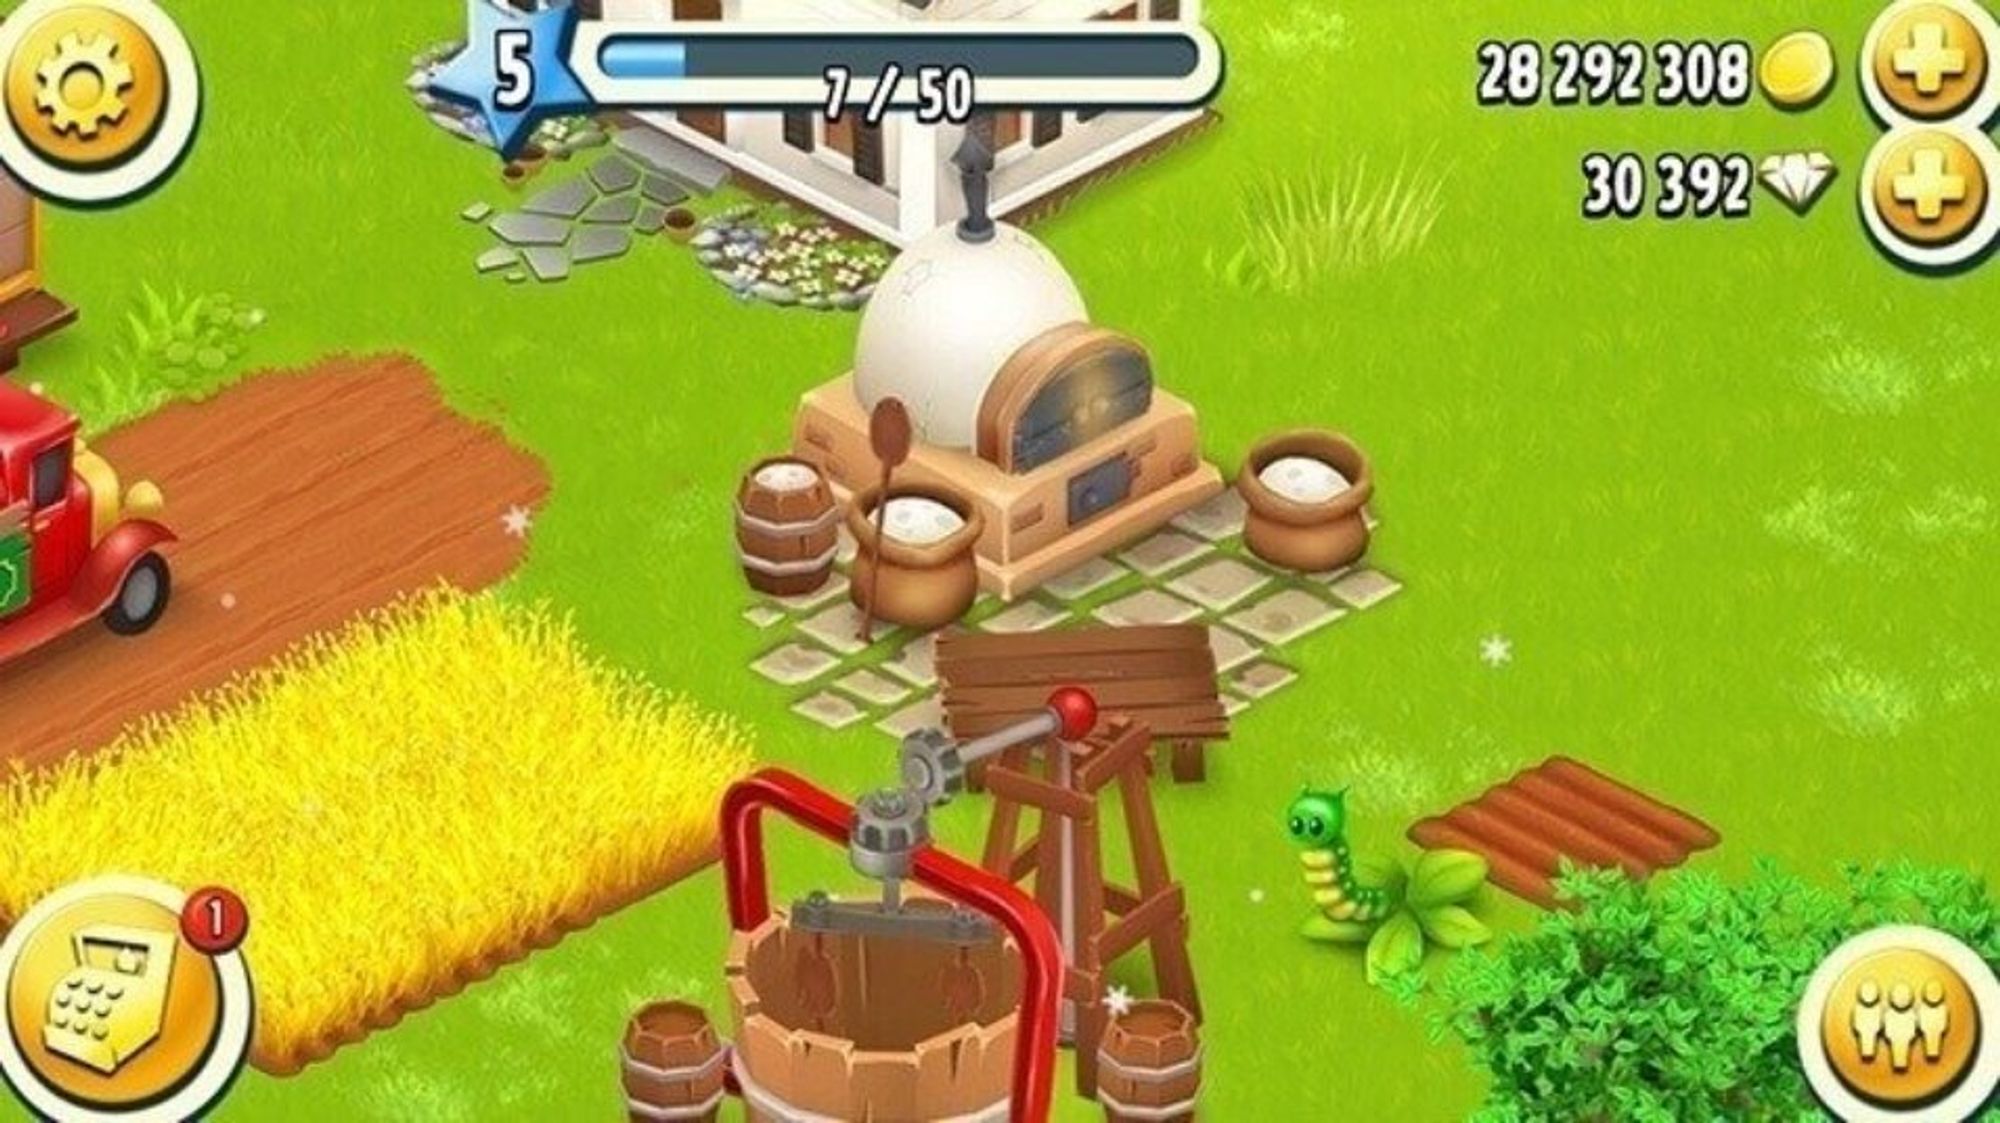 Hayday.Coolcheat.Club Tools To Diamonds Hay Day Android Game ... - 